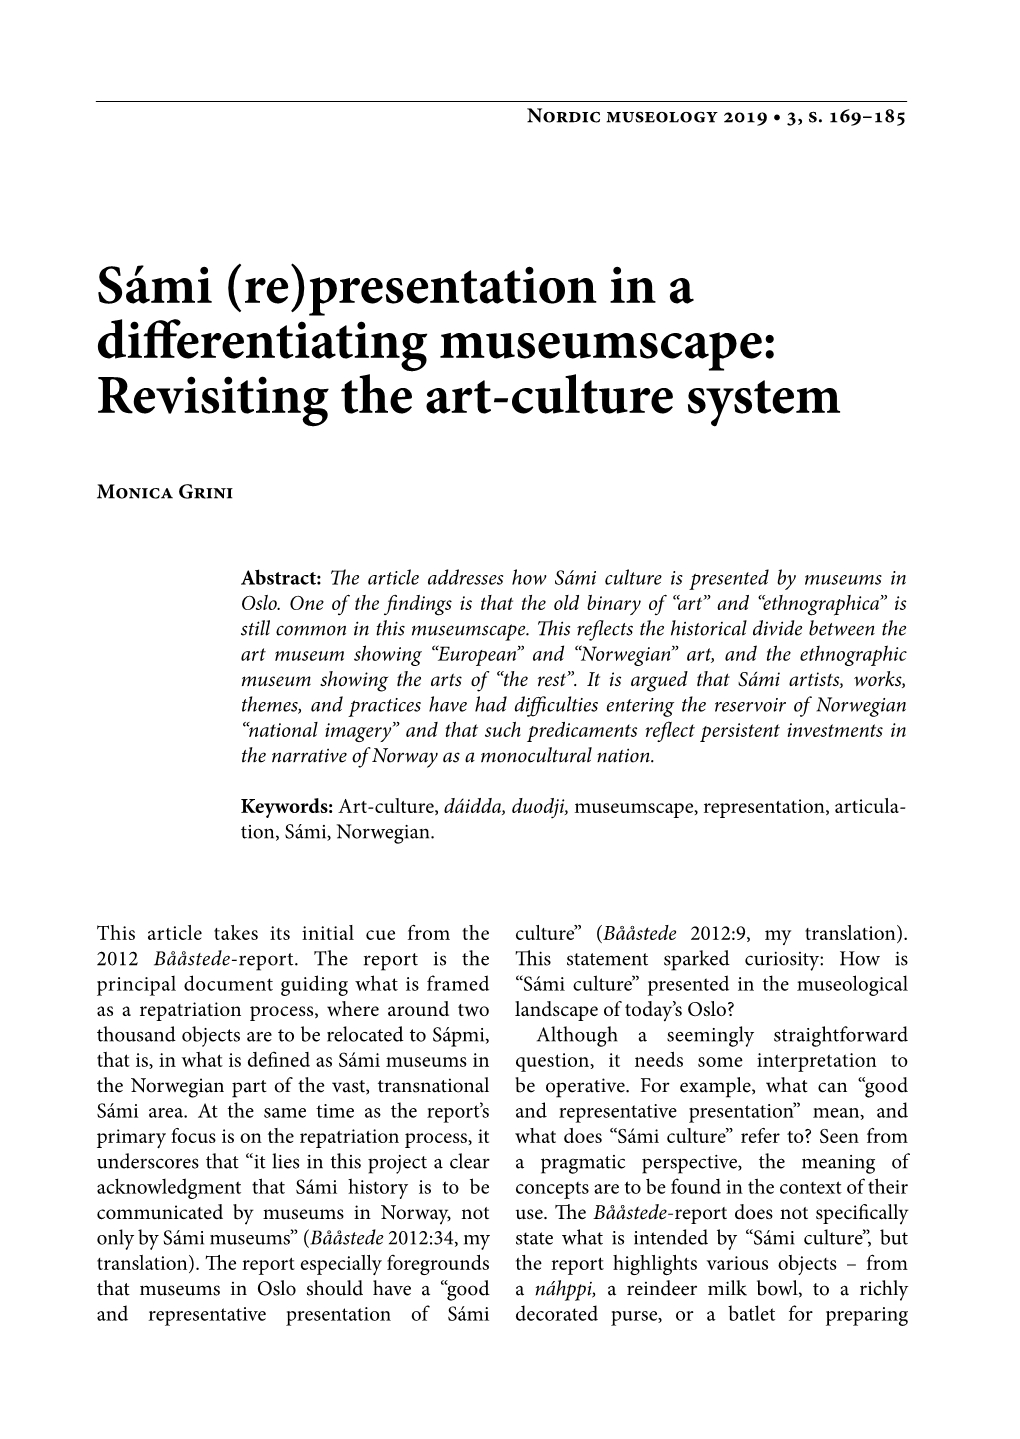 Sámi (Re)Presentation in a Differentiating Museumscape: Revisiting the Art-Culture System